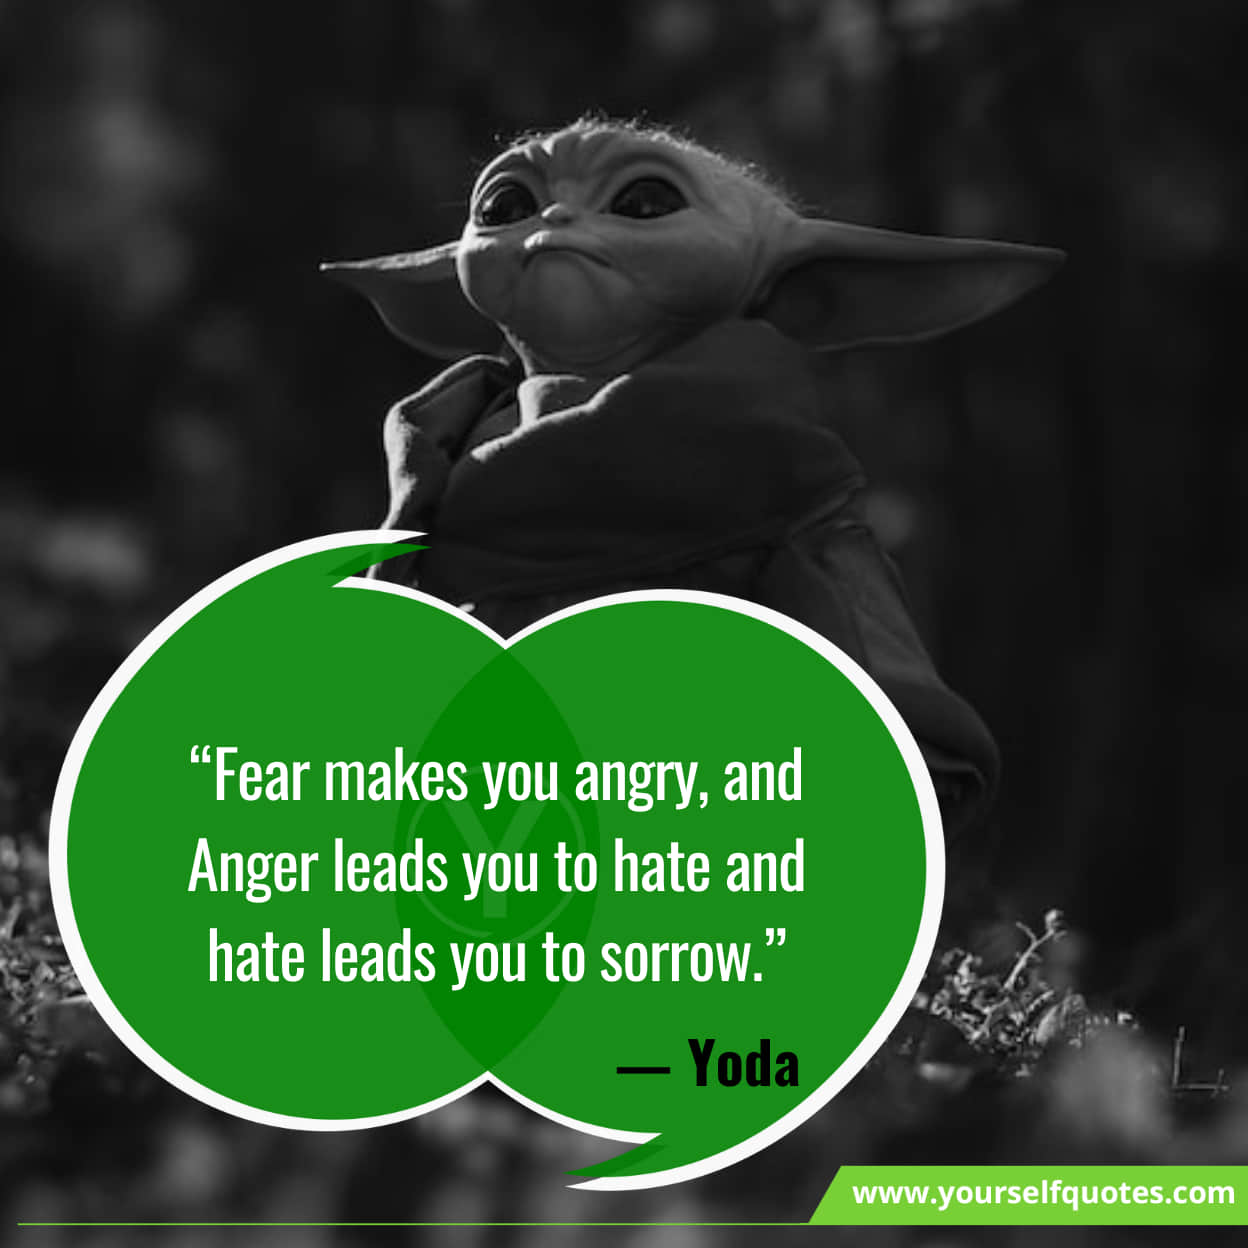 Yoda Quotes About Life